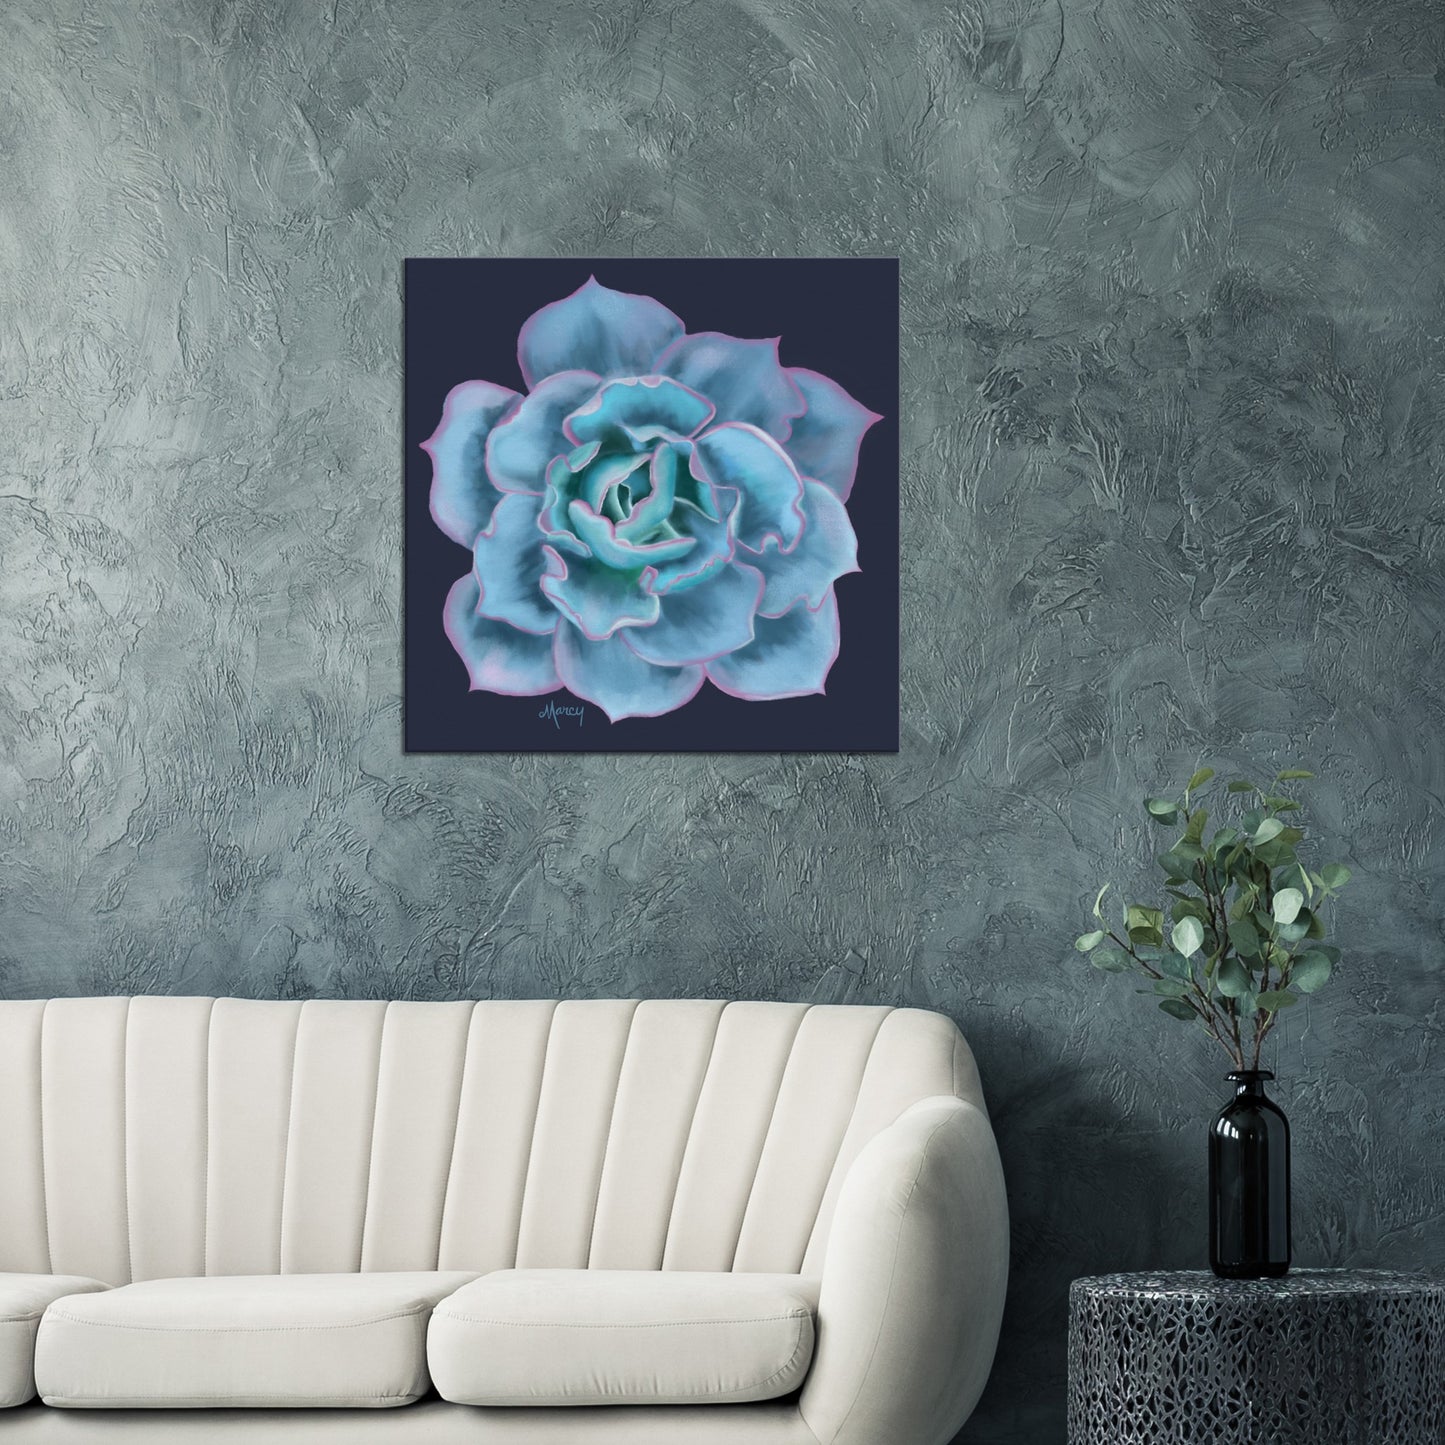 Succulent of the Month | December | on Stretched Canvas | Echeveria Succulent